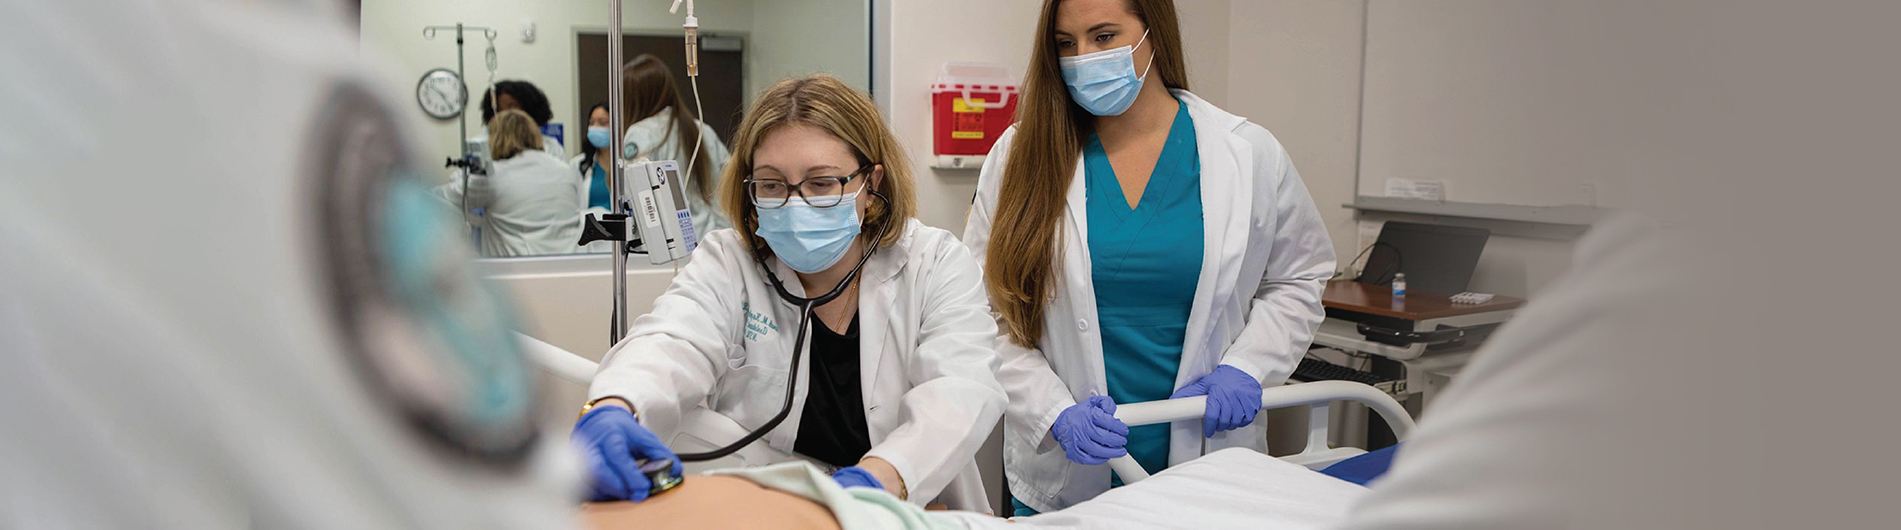 Student in health profession participating in experiential learning 